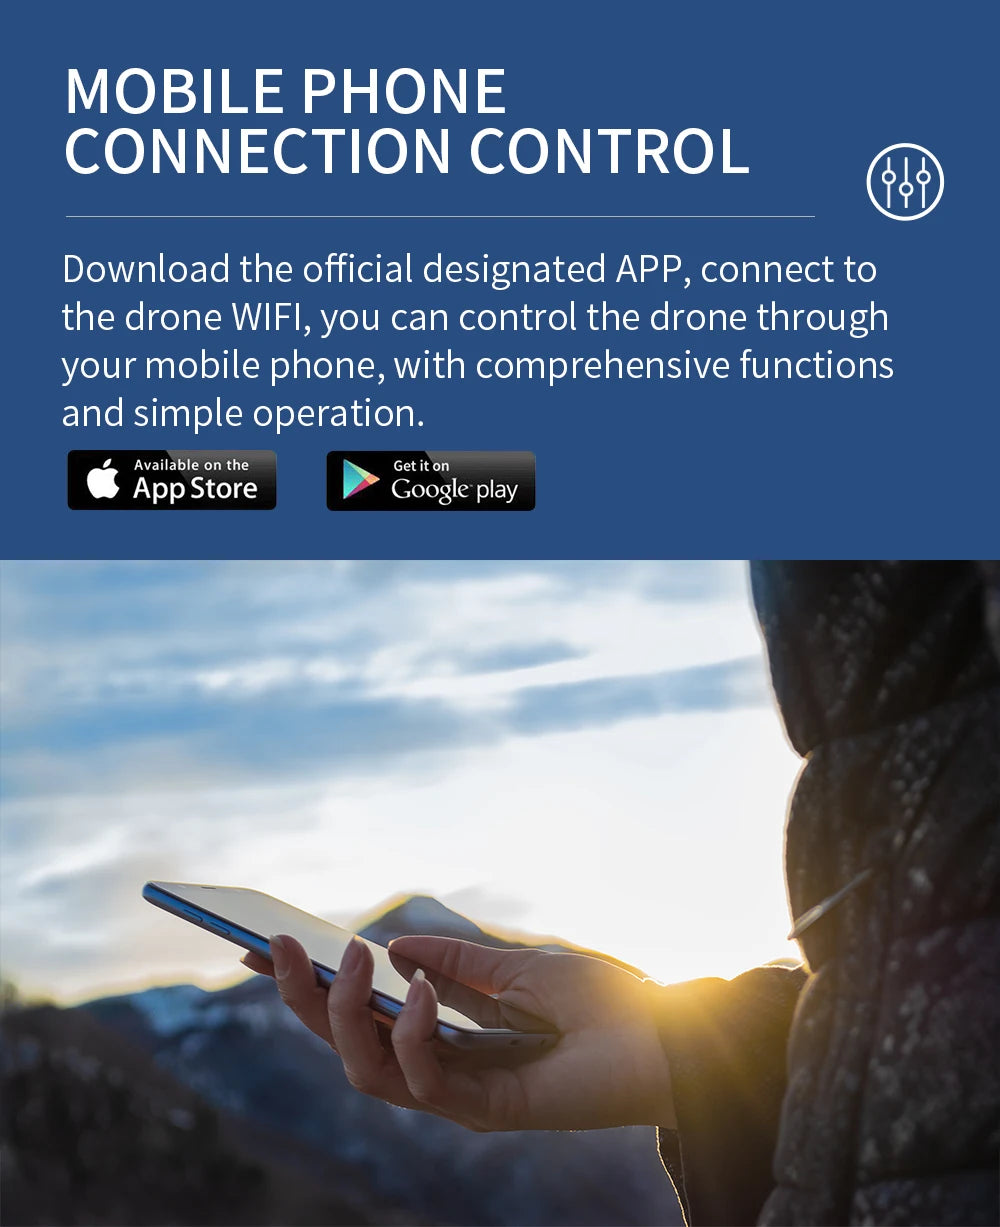 ZLRC SG700 MAX Drone, download the official designated app, connect to the drone wifi, you can